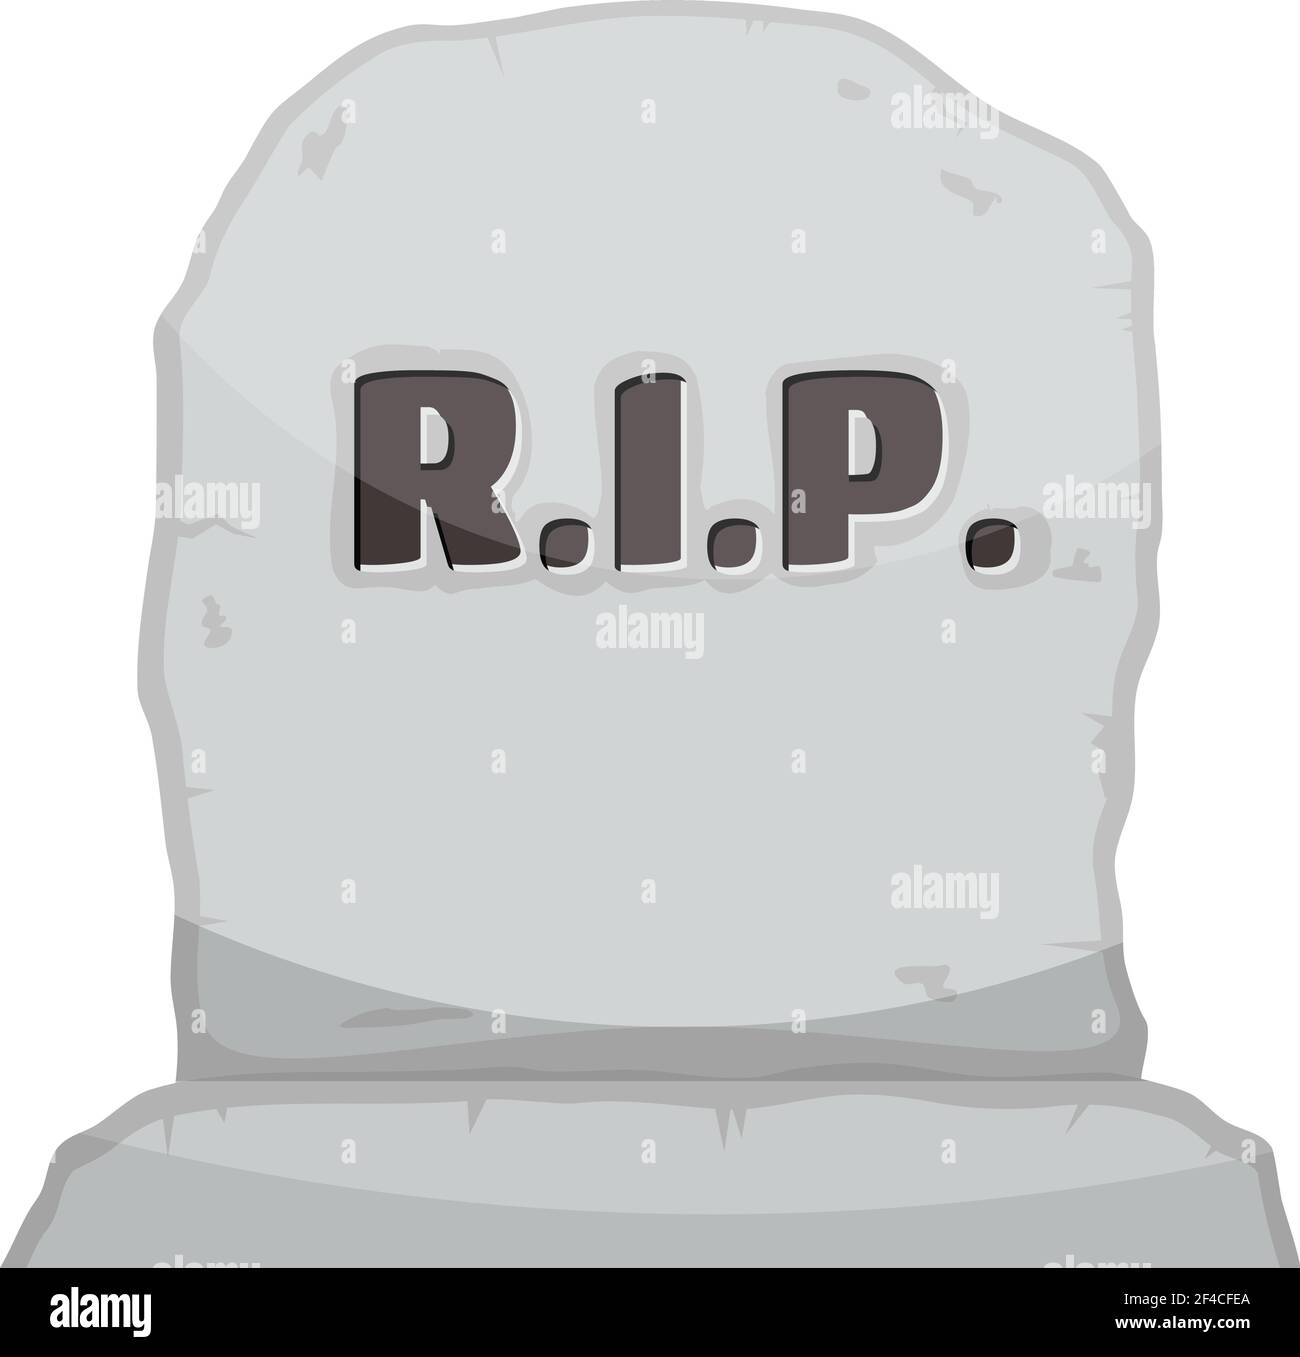 Vector illustration gray gravestone on white background. Cartoon image of a grave stone with the text RIP. Stock Vector